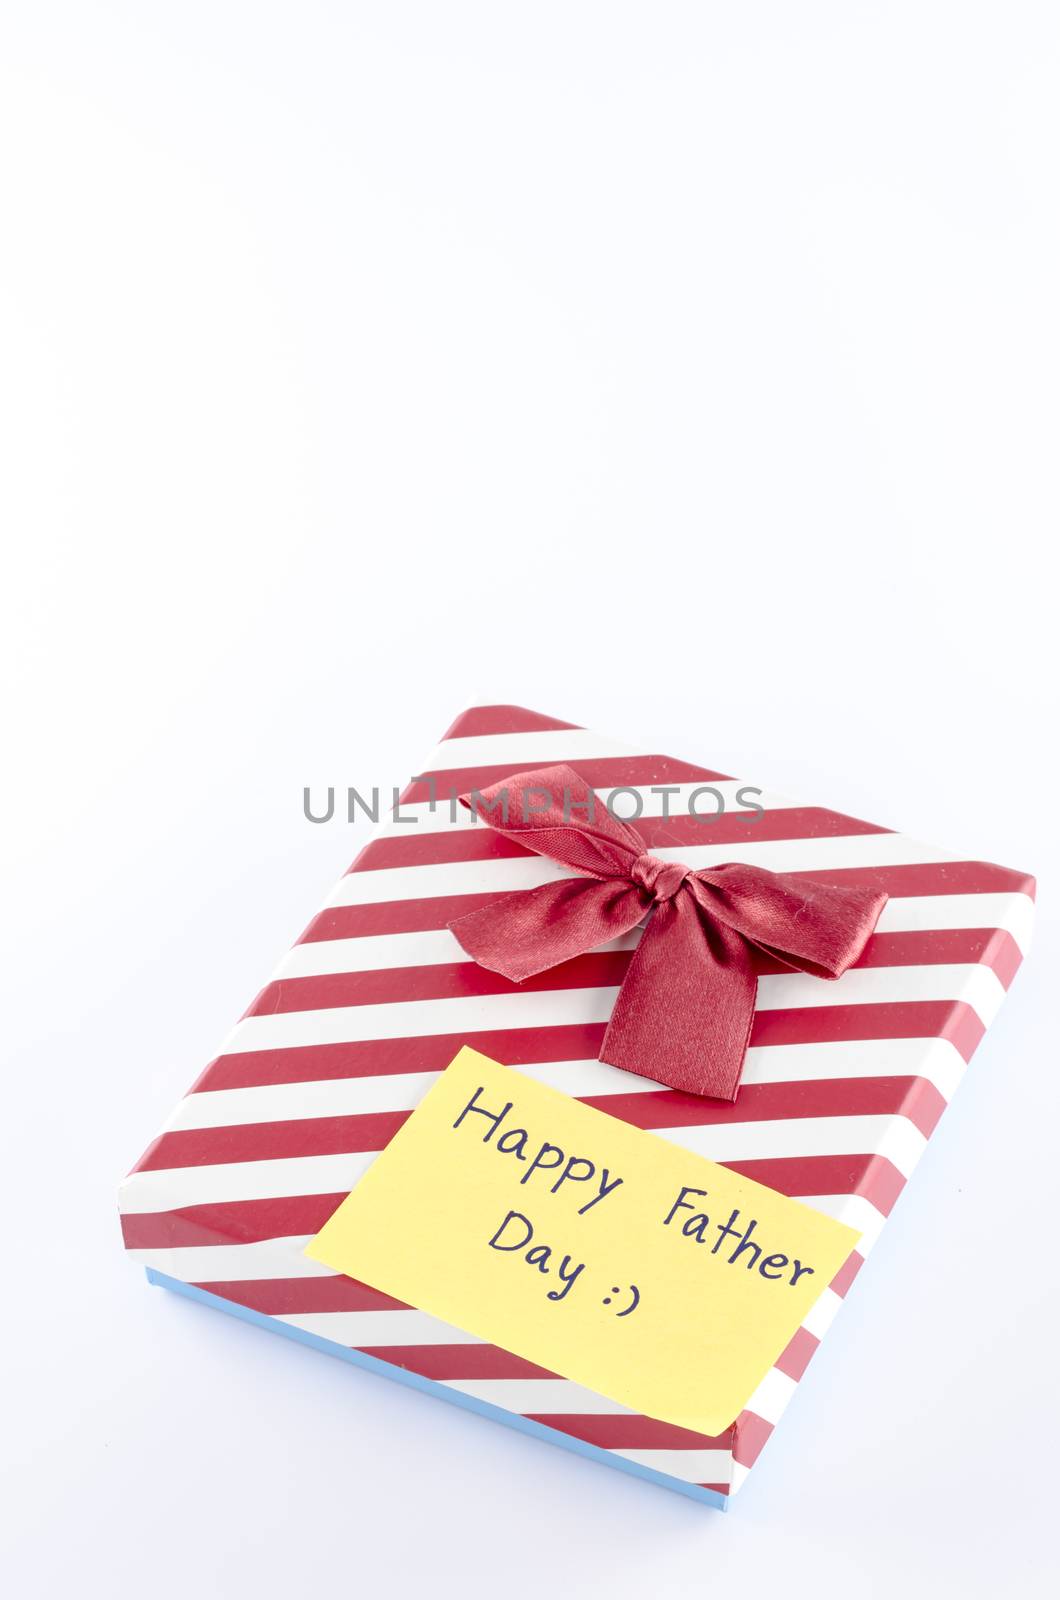 gift box with card tag write happy fathe day word on a white background